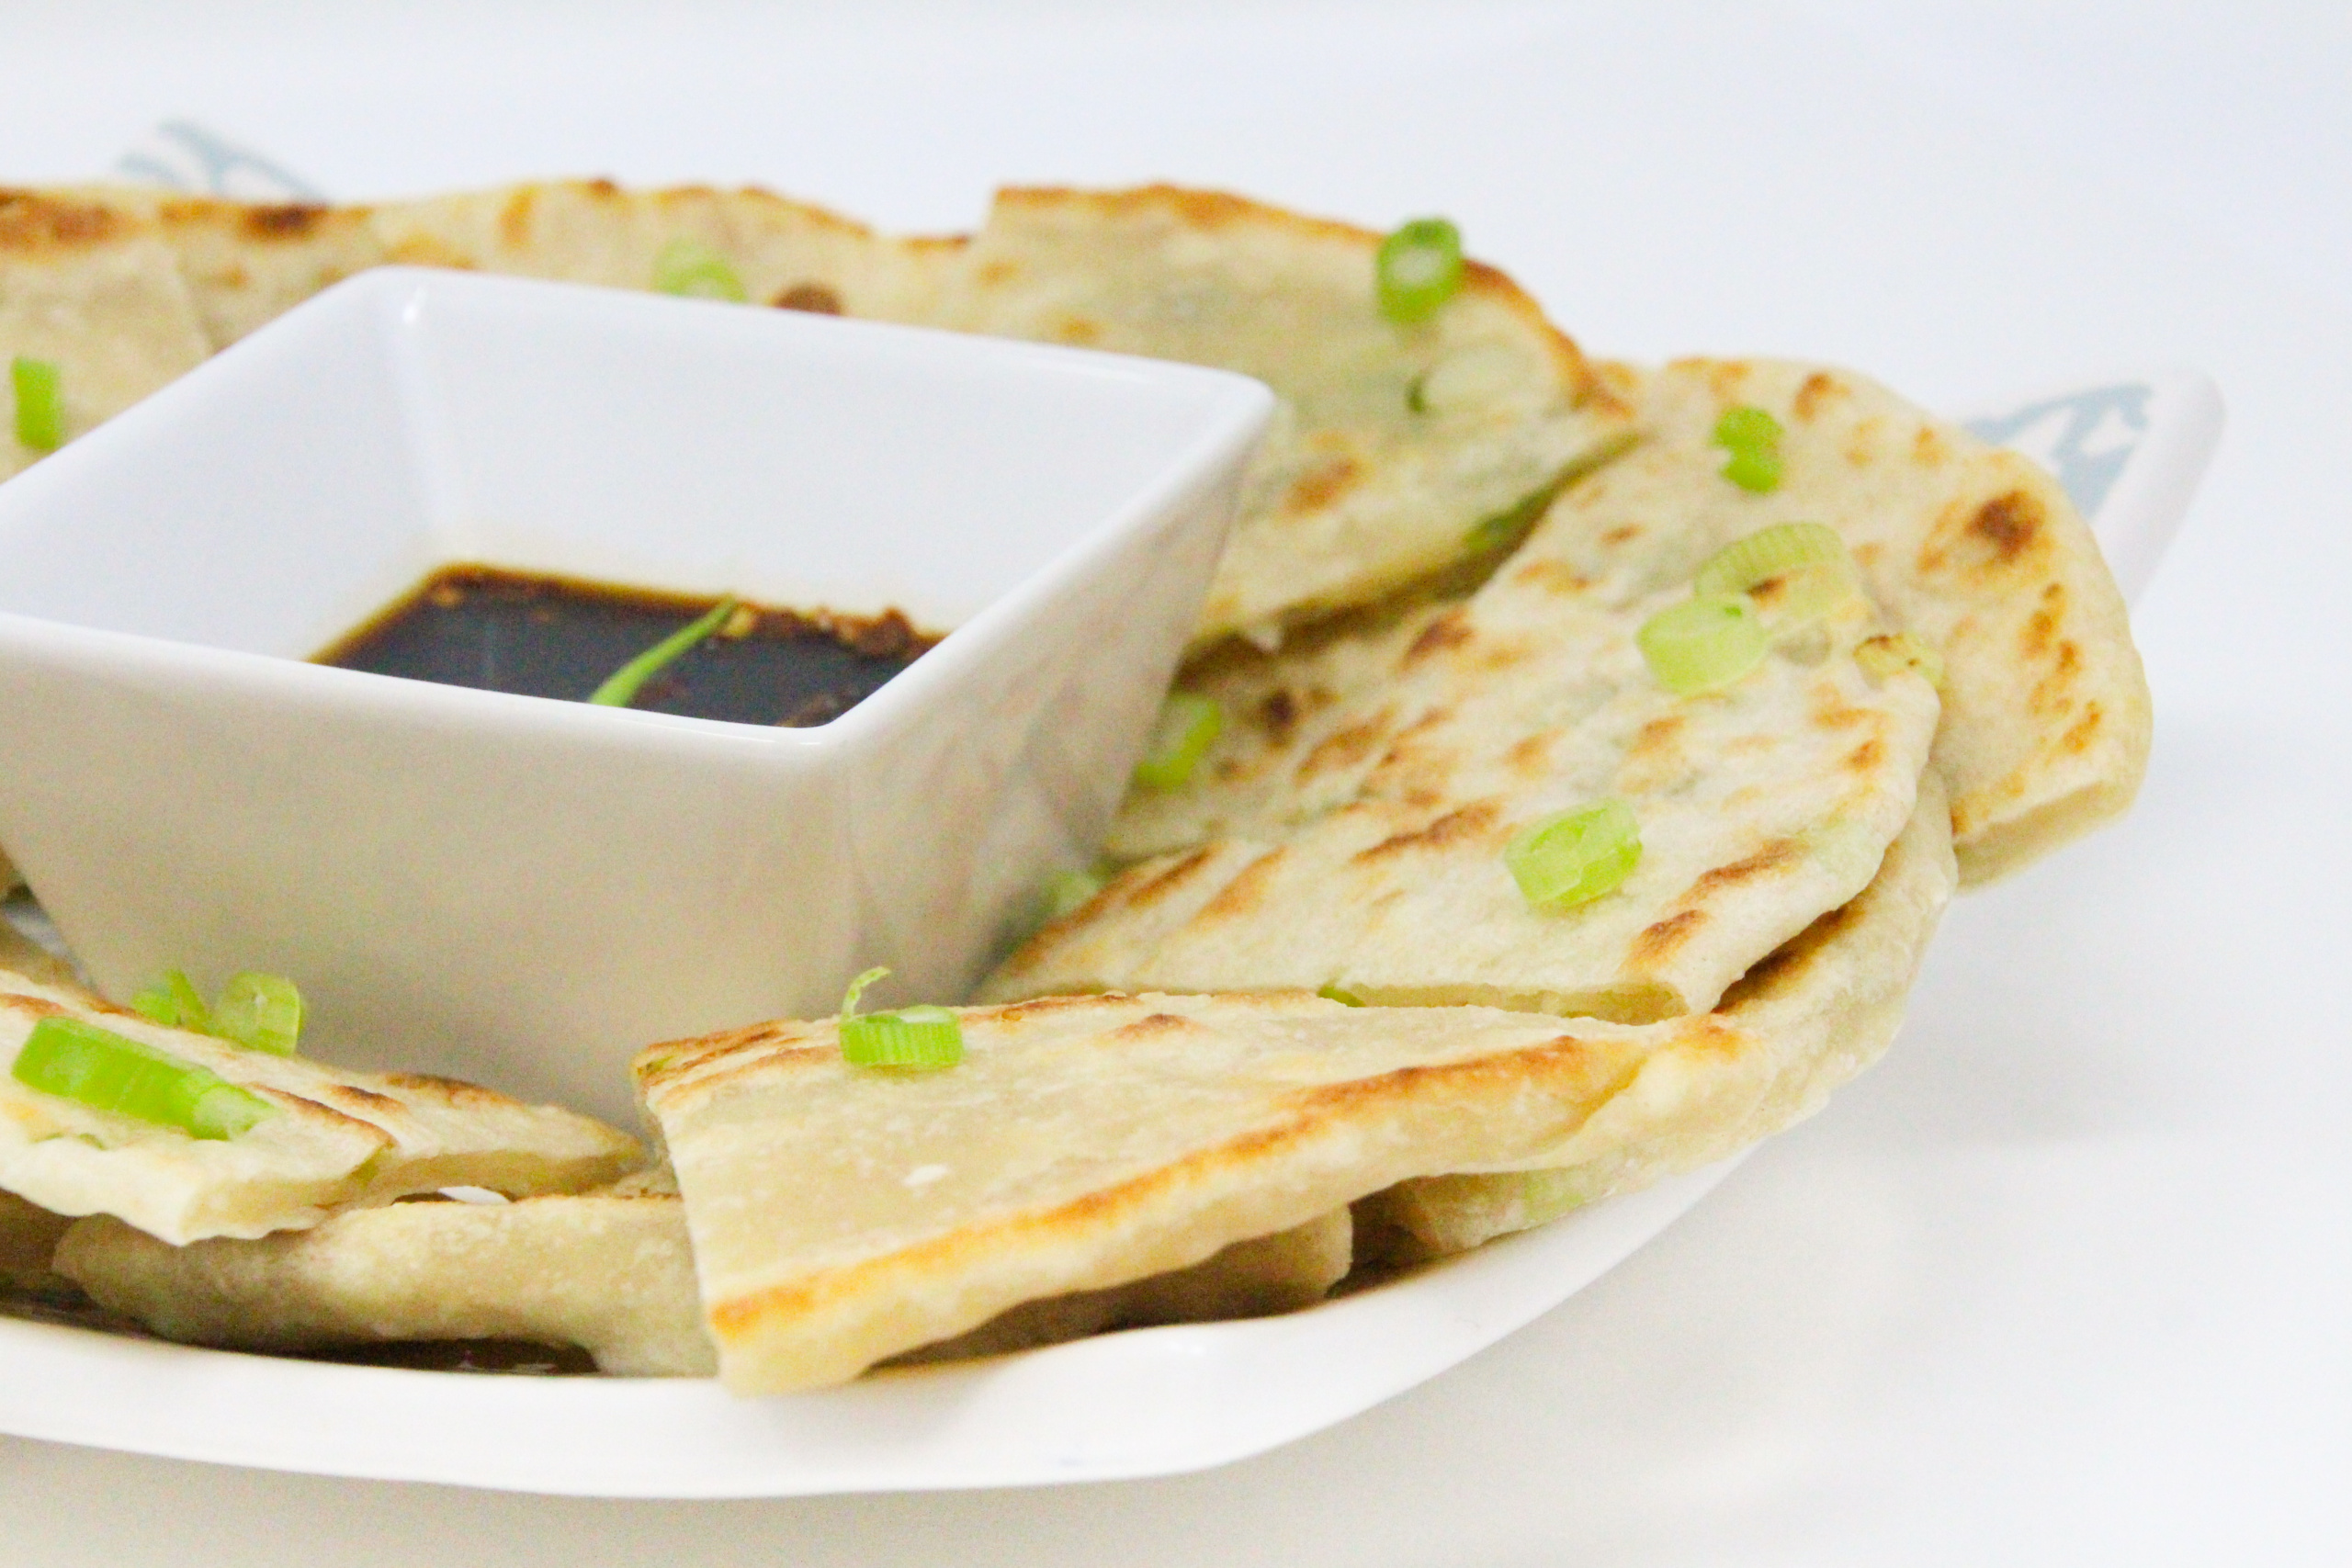 A few super simple ingredients and a hot skillet are all that's necessary to whip up delicious Scallion Pancakes. Recipe shared with permission granted by Jennifer J. Chow, author of HOT POT MURDER. 